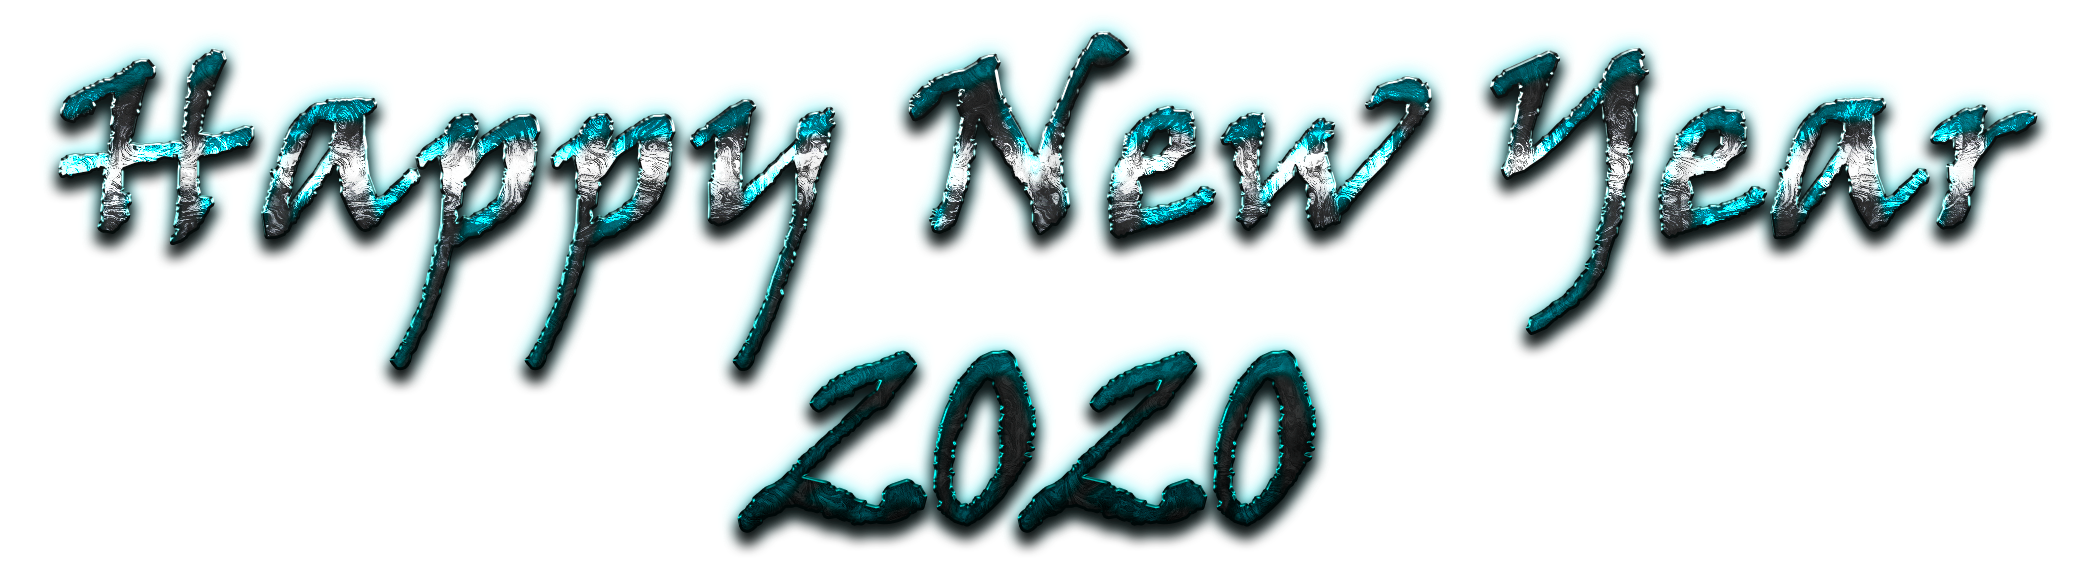 New Year 2020 PNG Images Transparent Free Download.